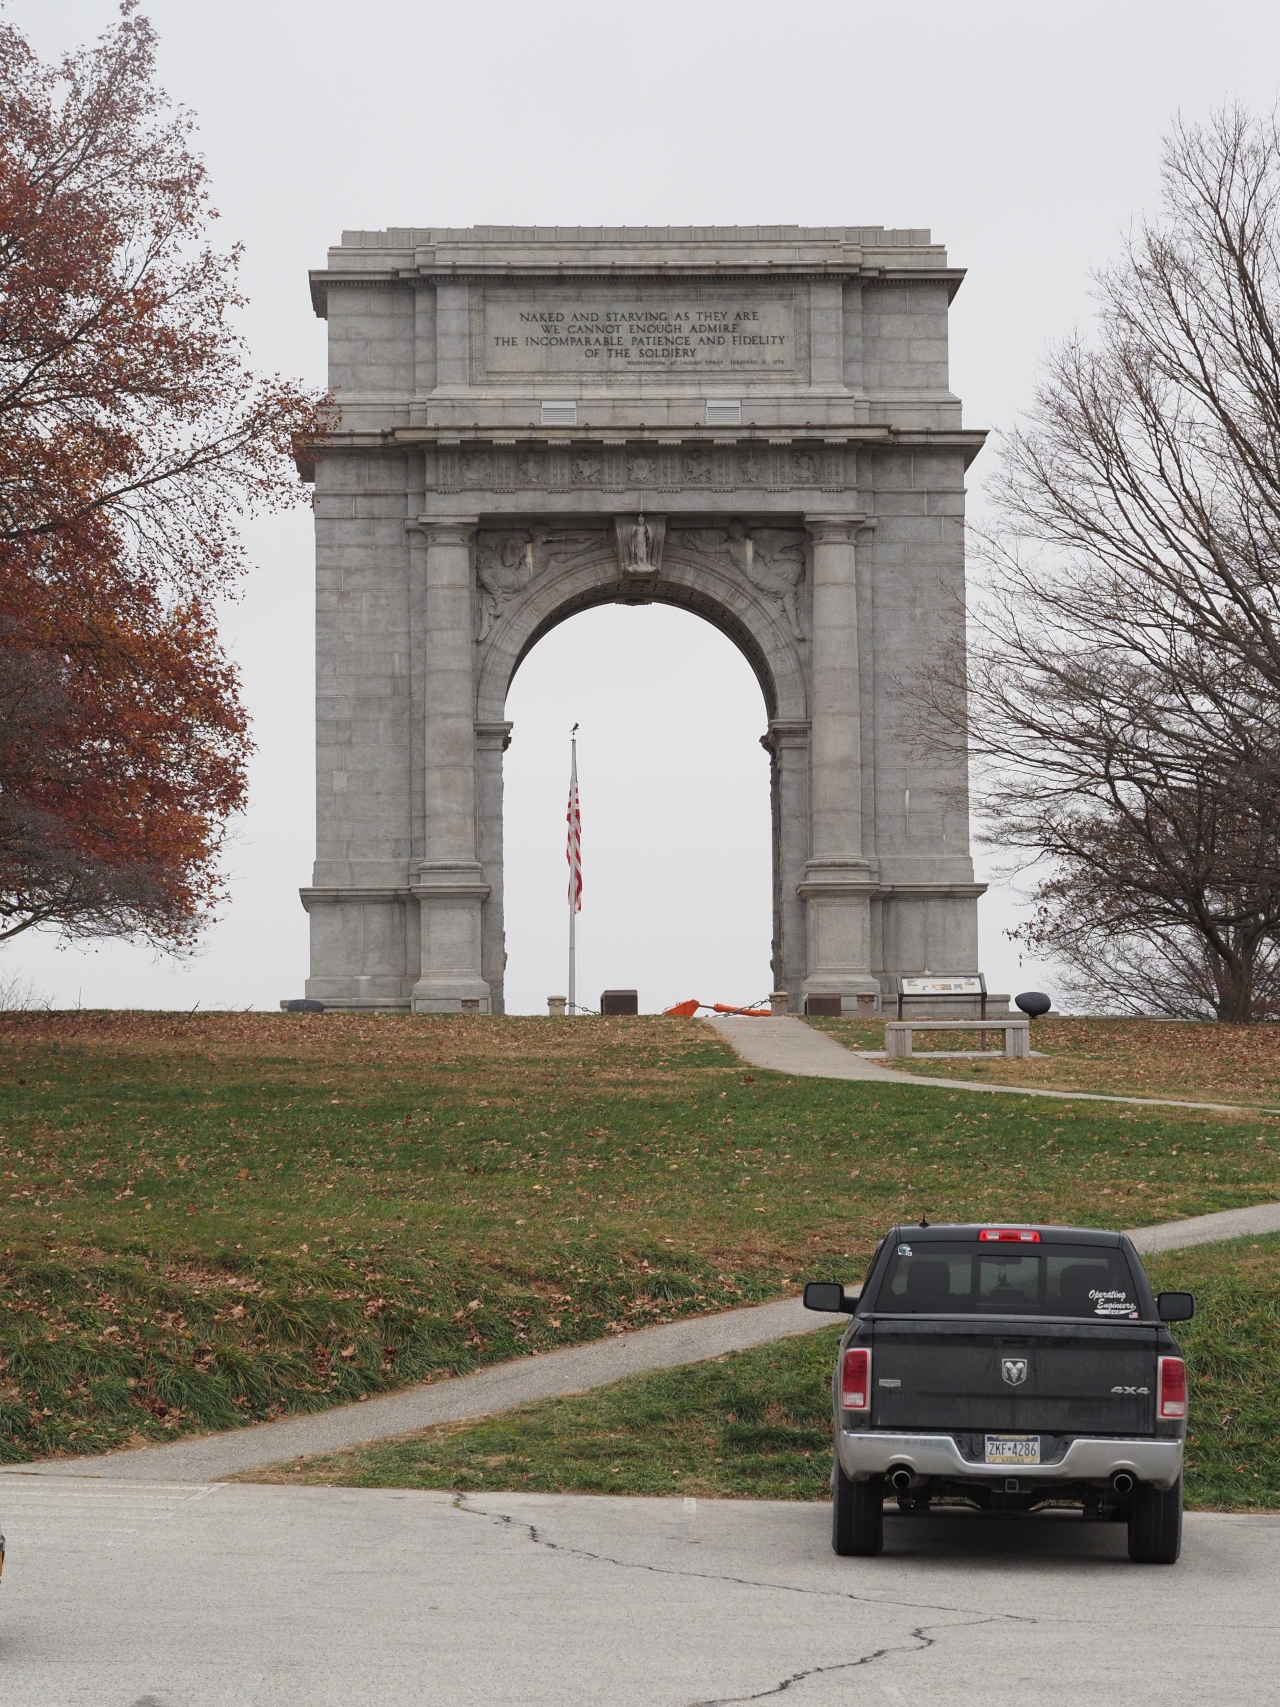 The National Memorial Arch at Valley Forge Park - Late 2021. A bajillion more photos follow.